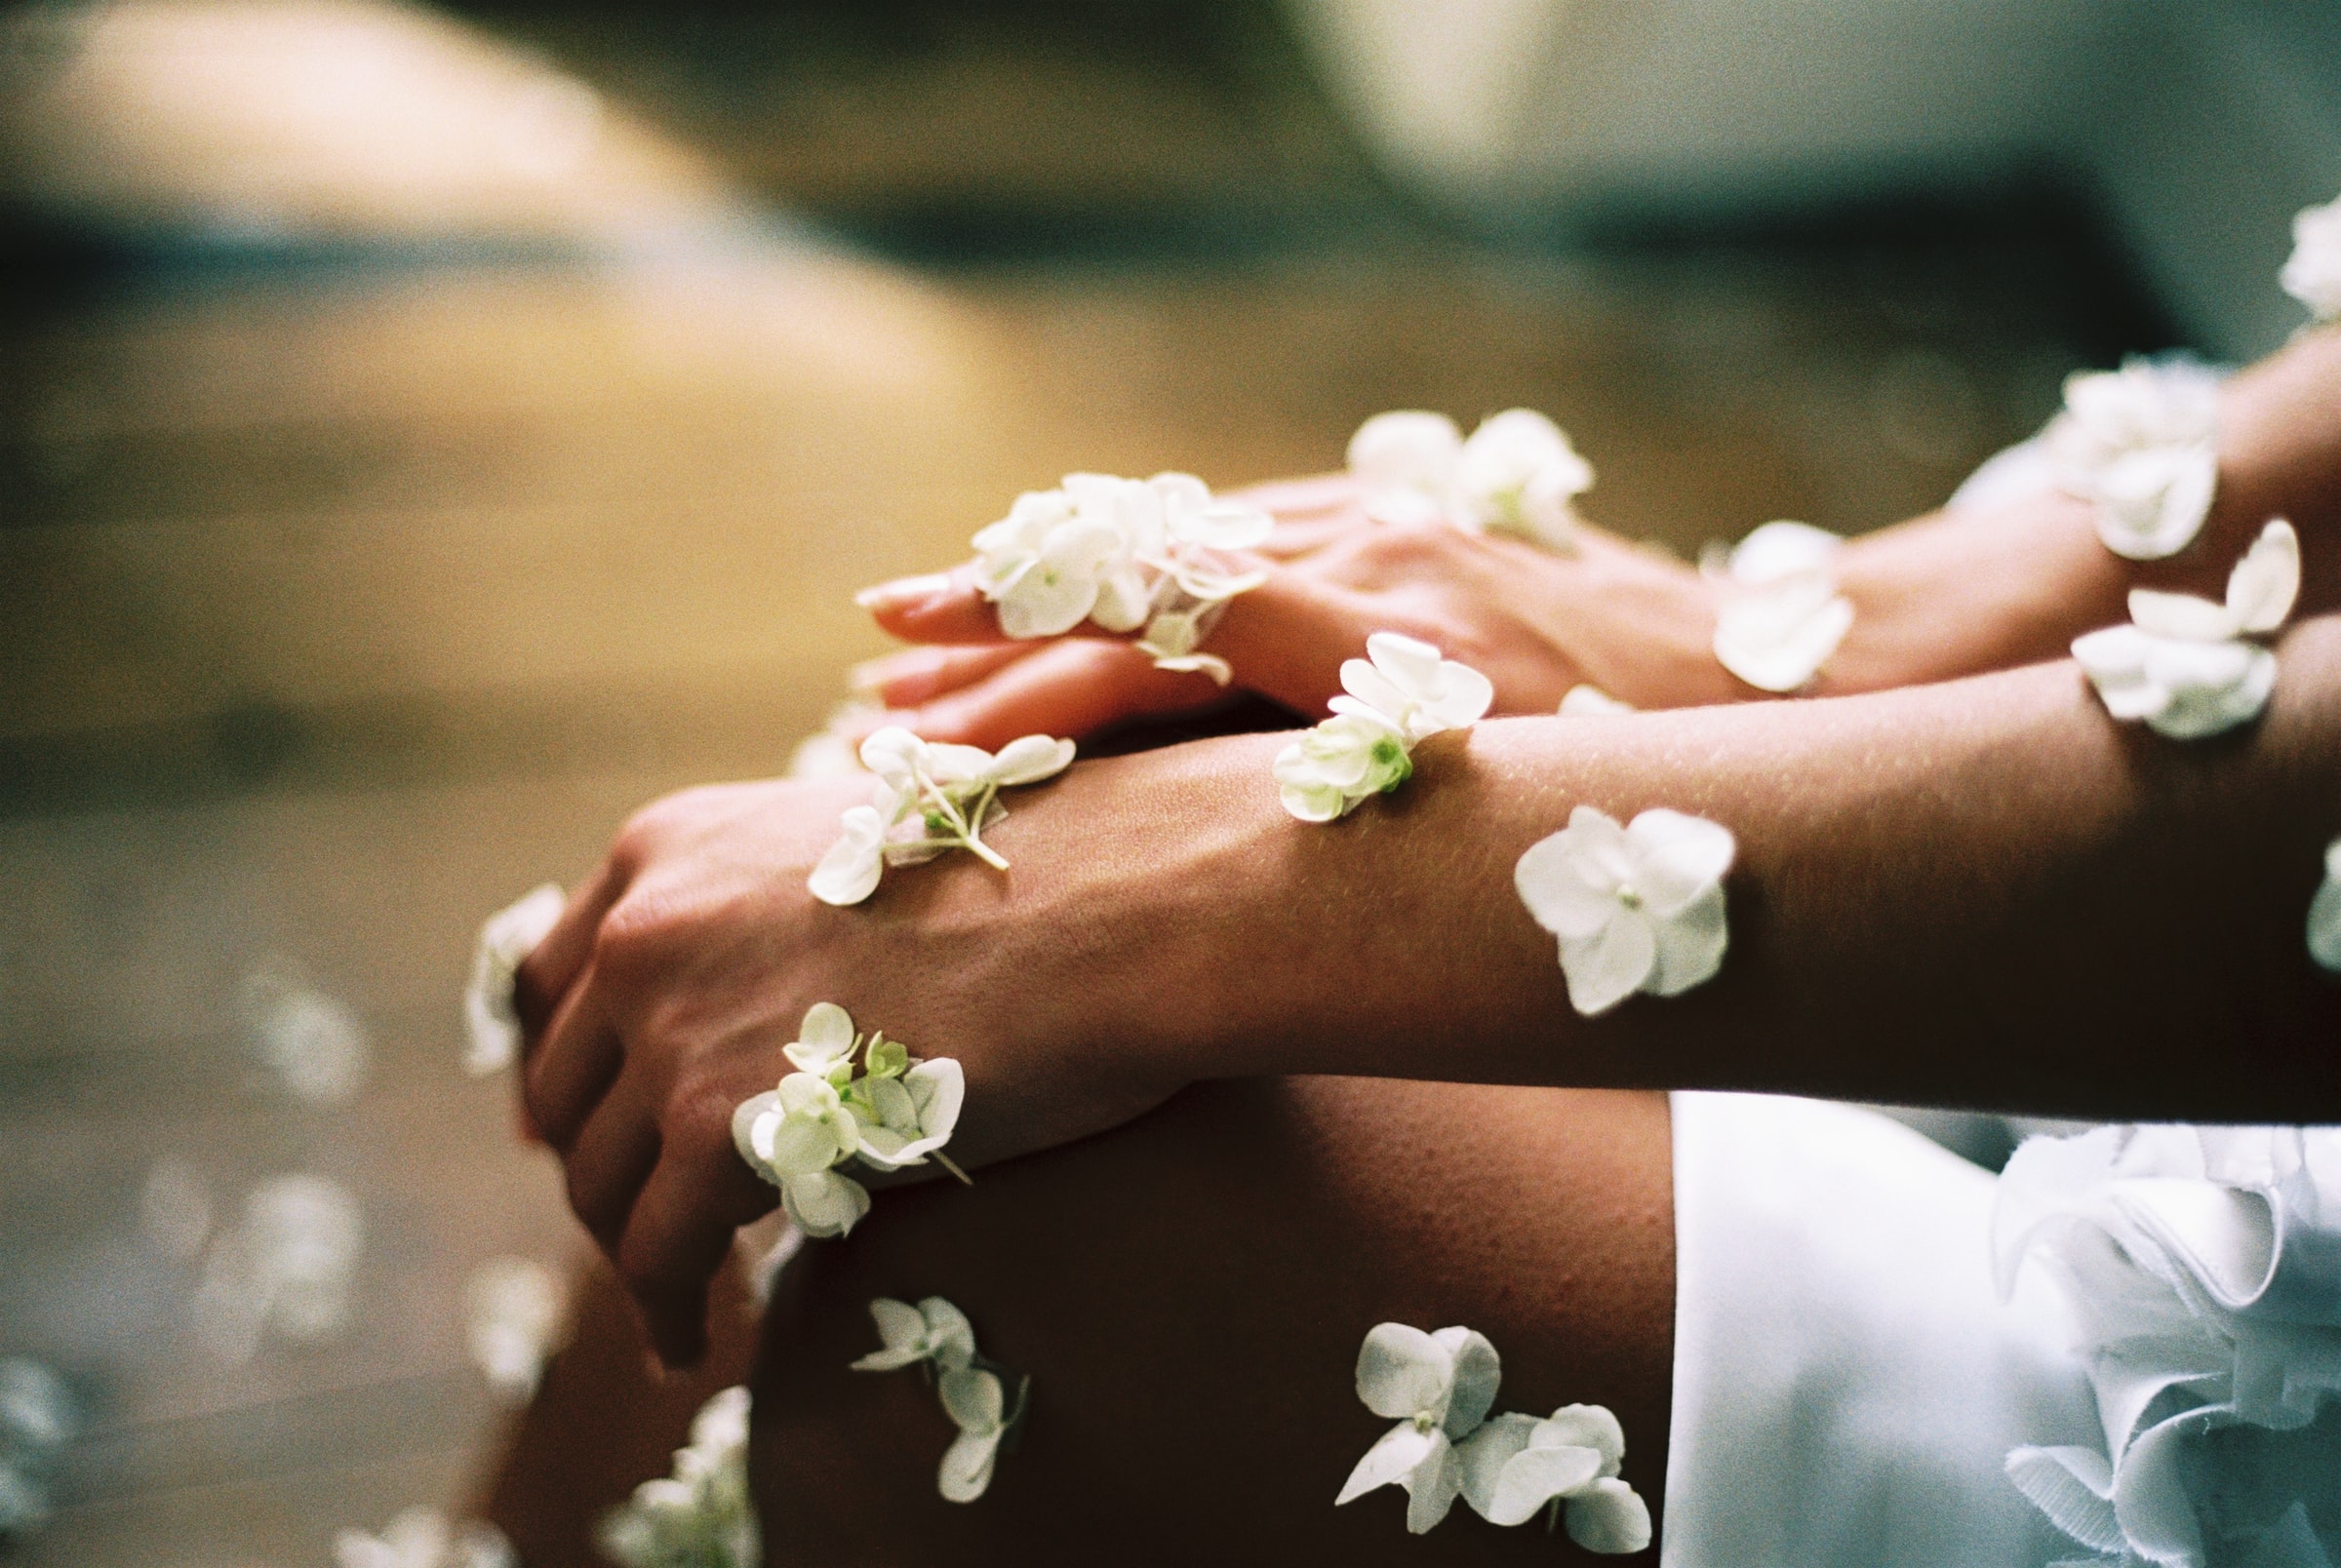 A woman hands soothing with the white flowers